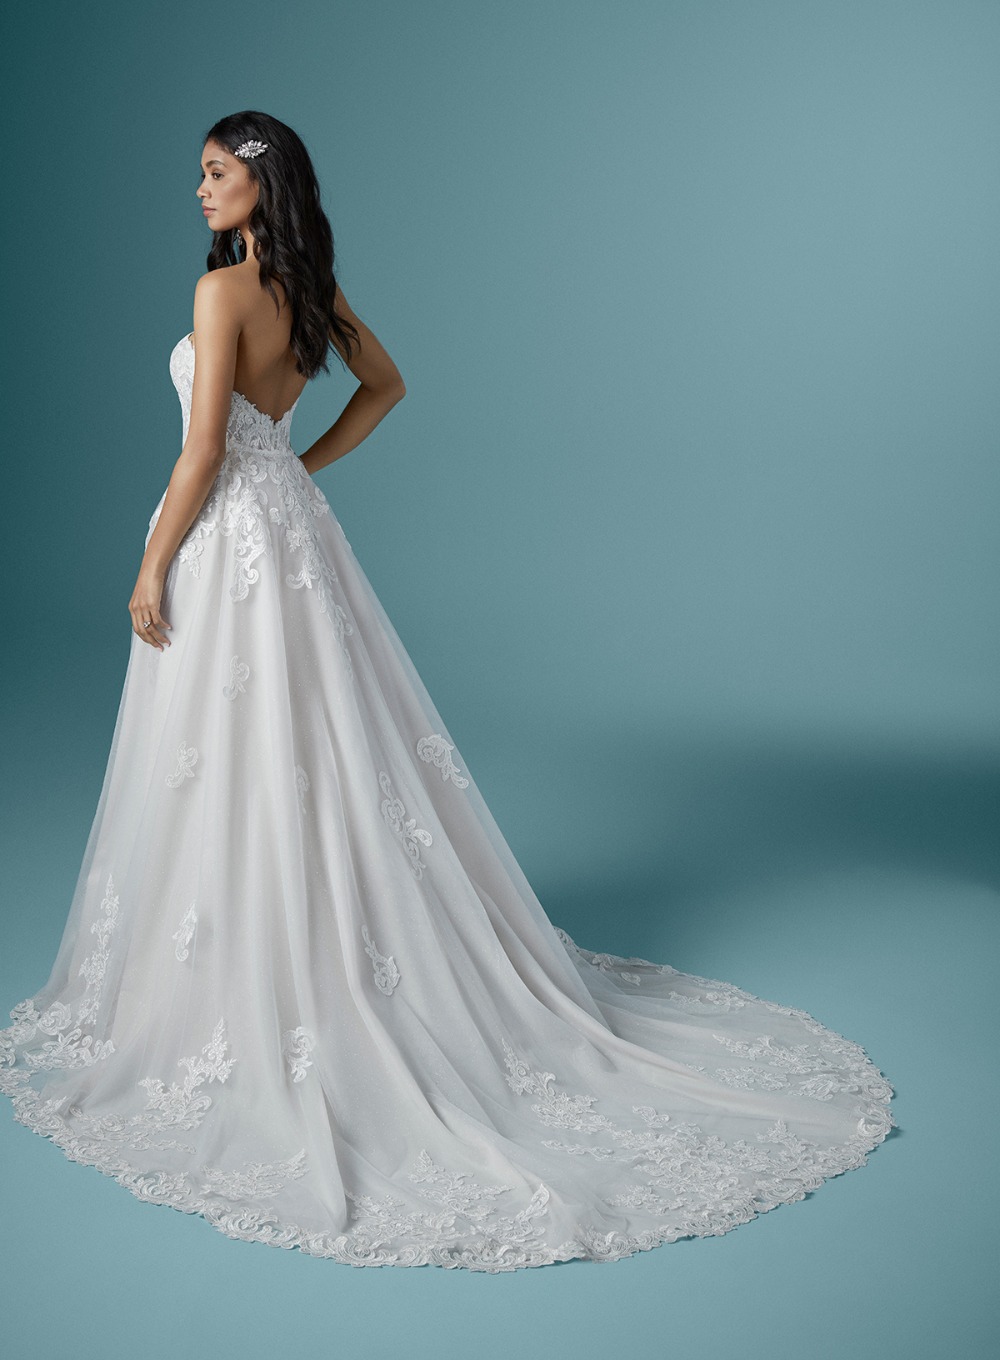 Maggie-Sottero-Kaysen-20MS323-Back1-Uncropped